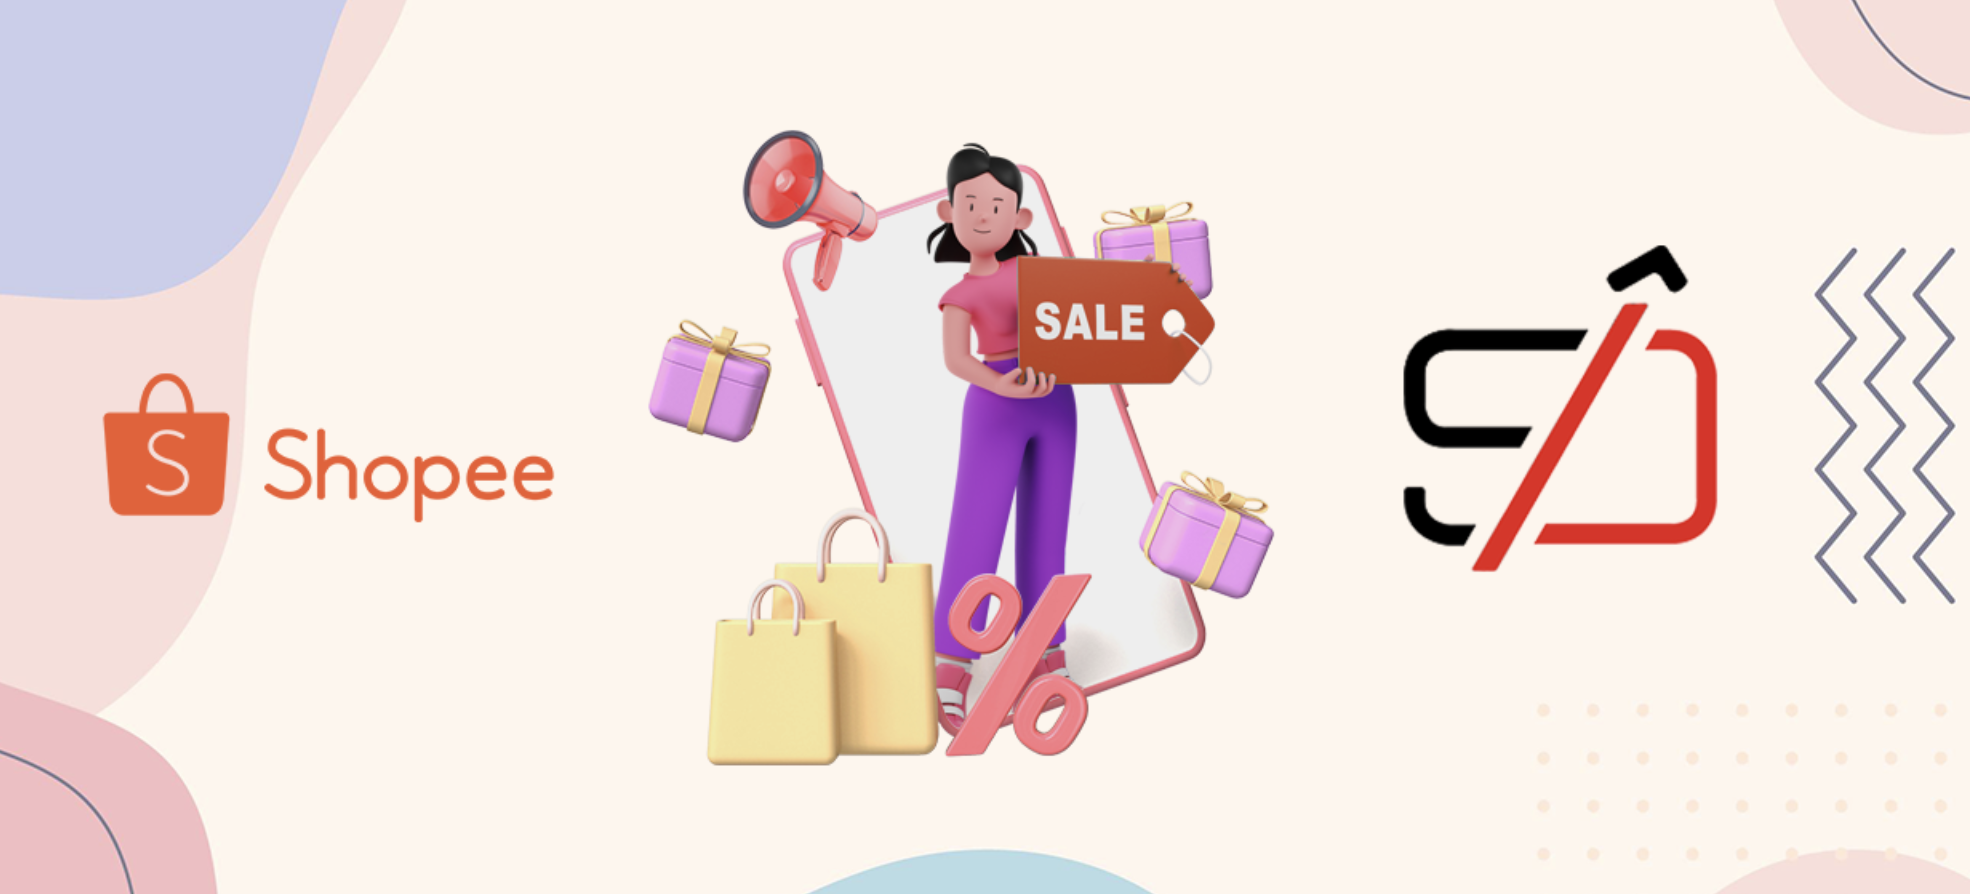 A Step-By-Step Guide On How To Become A Shopee Seller